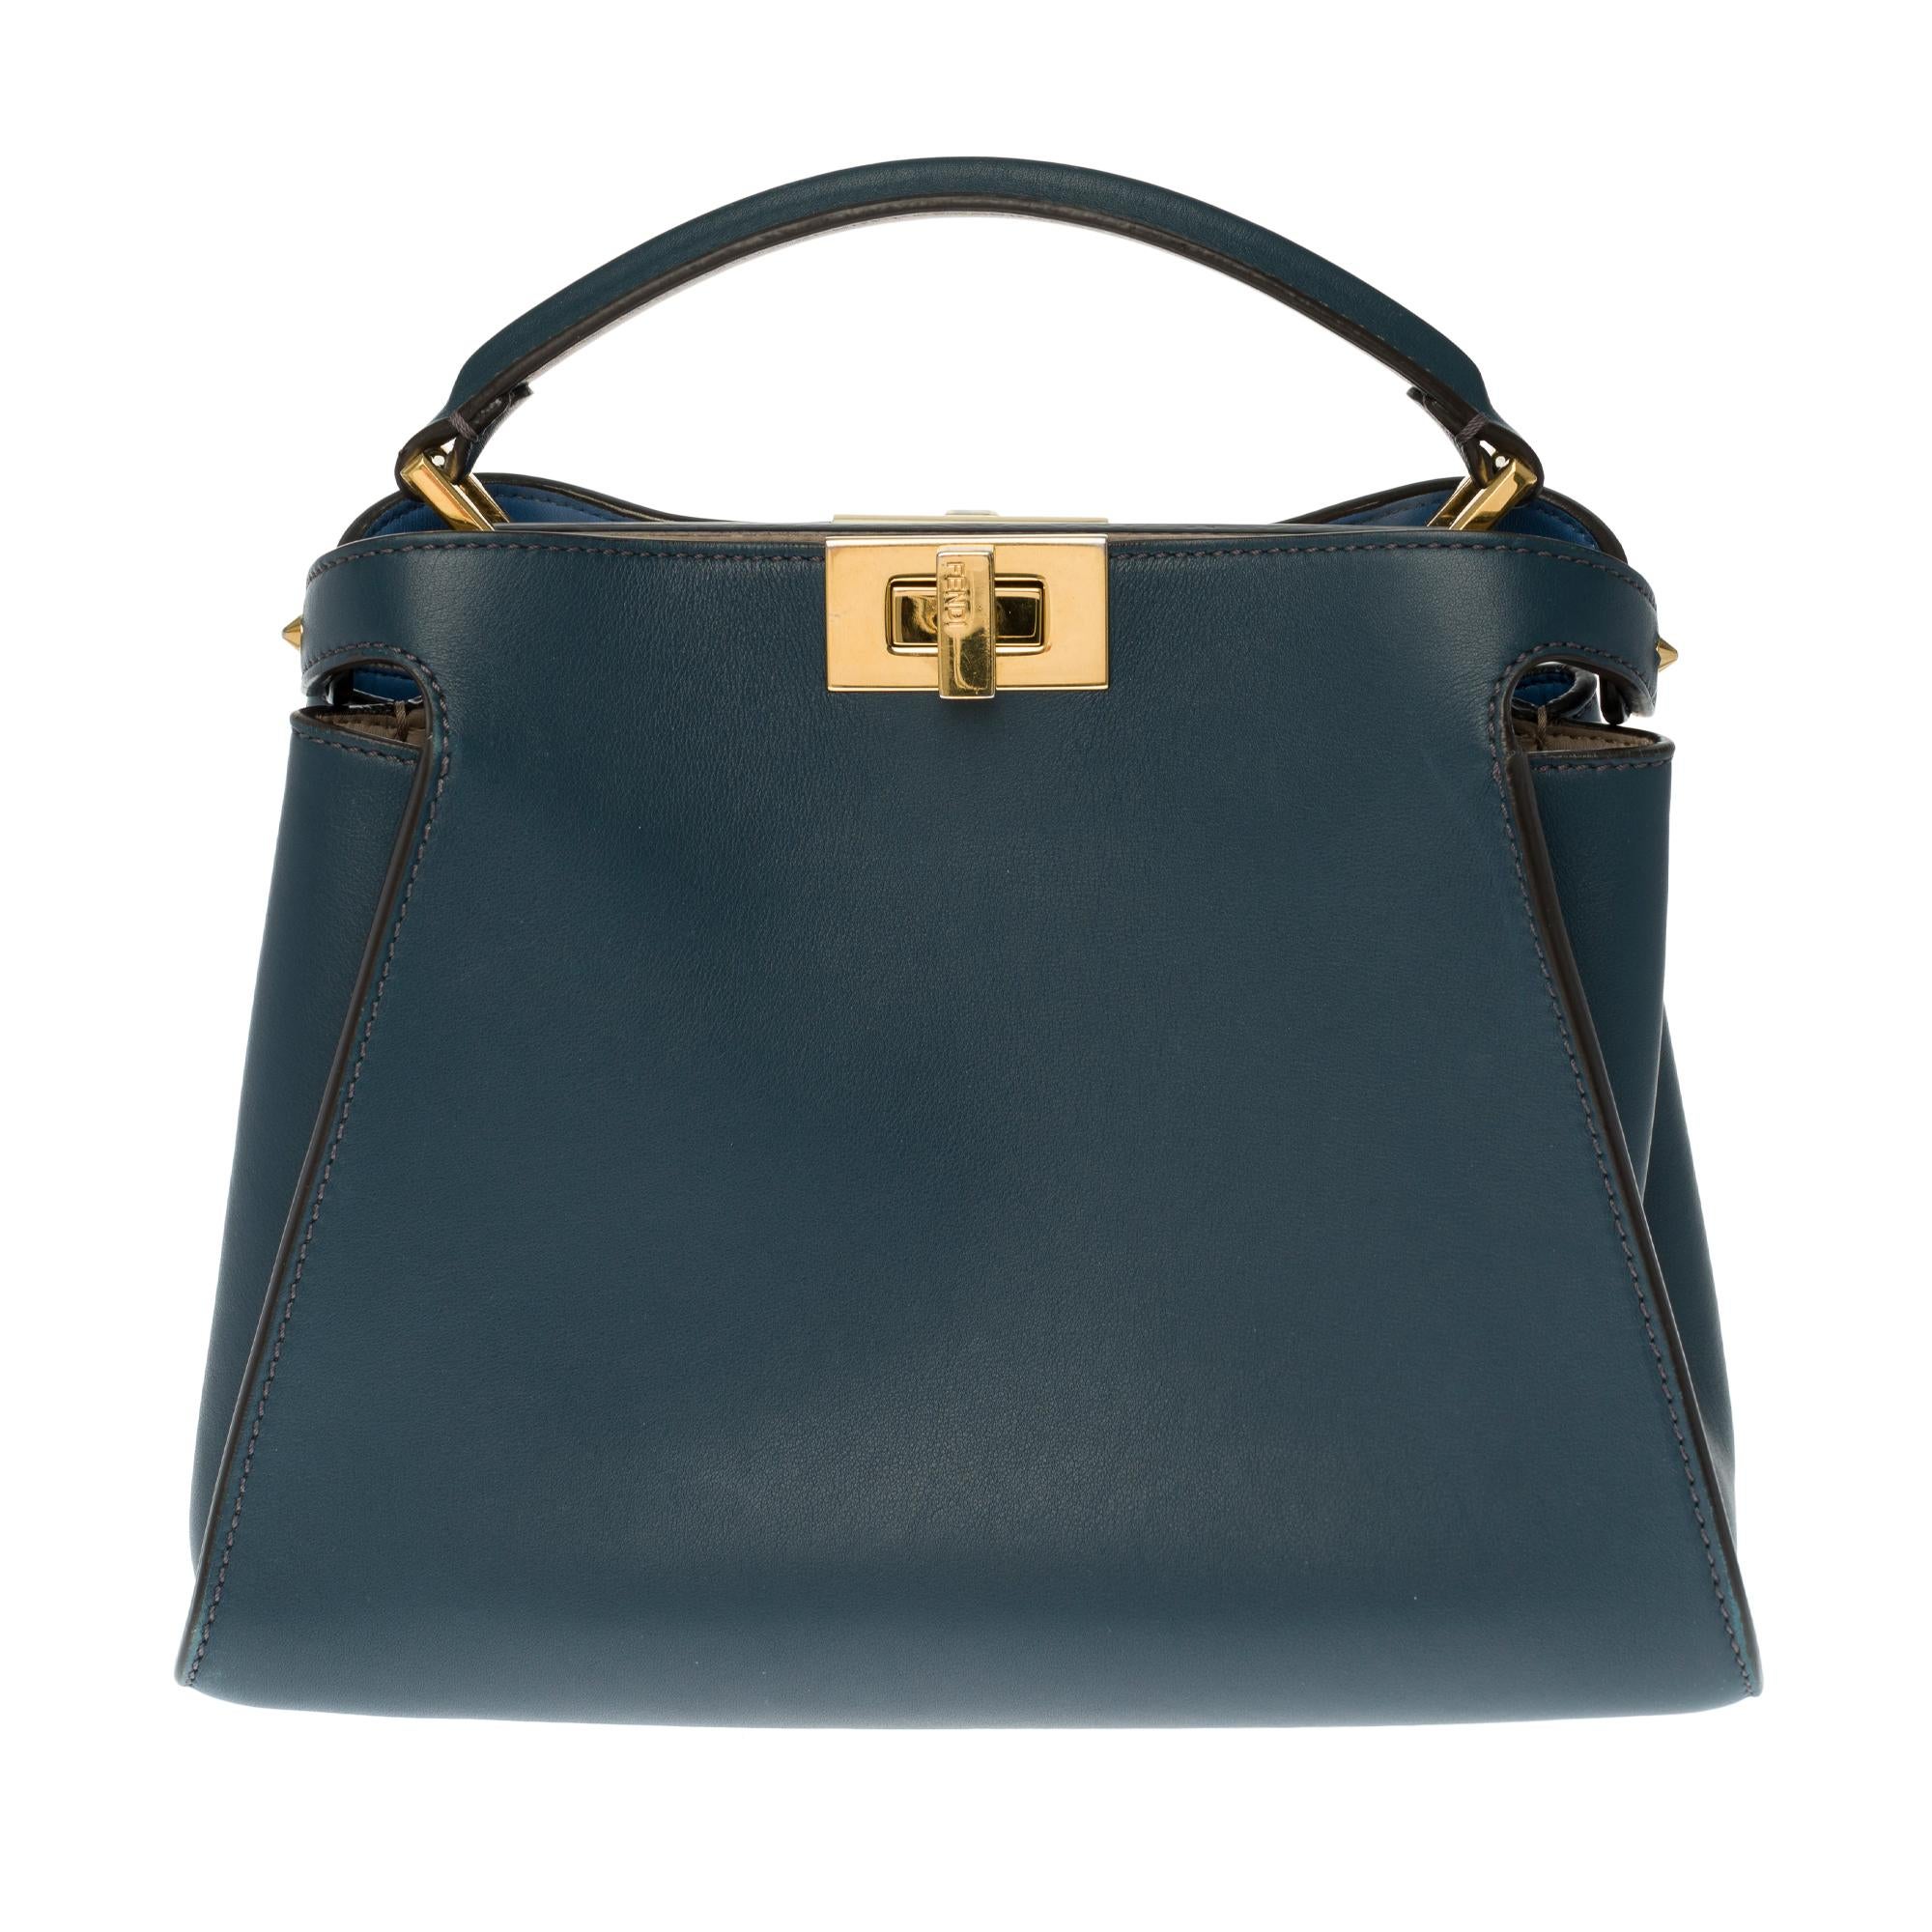 The highly sought-after Fendi Peekaboo shoulder bag in blue leather, gold metal hardware, blue leather handle, blue leather removable shoulder strap handle allowing a hand or shoulder or shoulder strap.

Closing by swivel button.
Lining in taupe